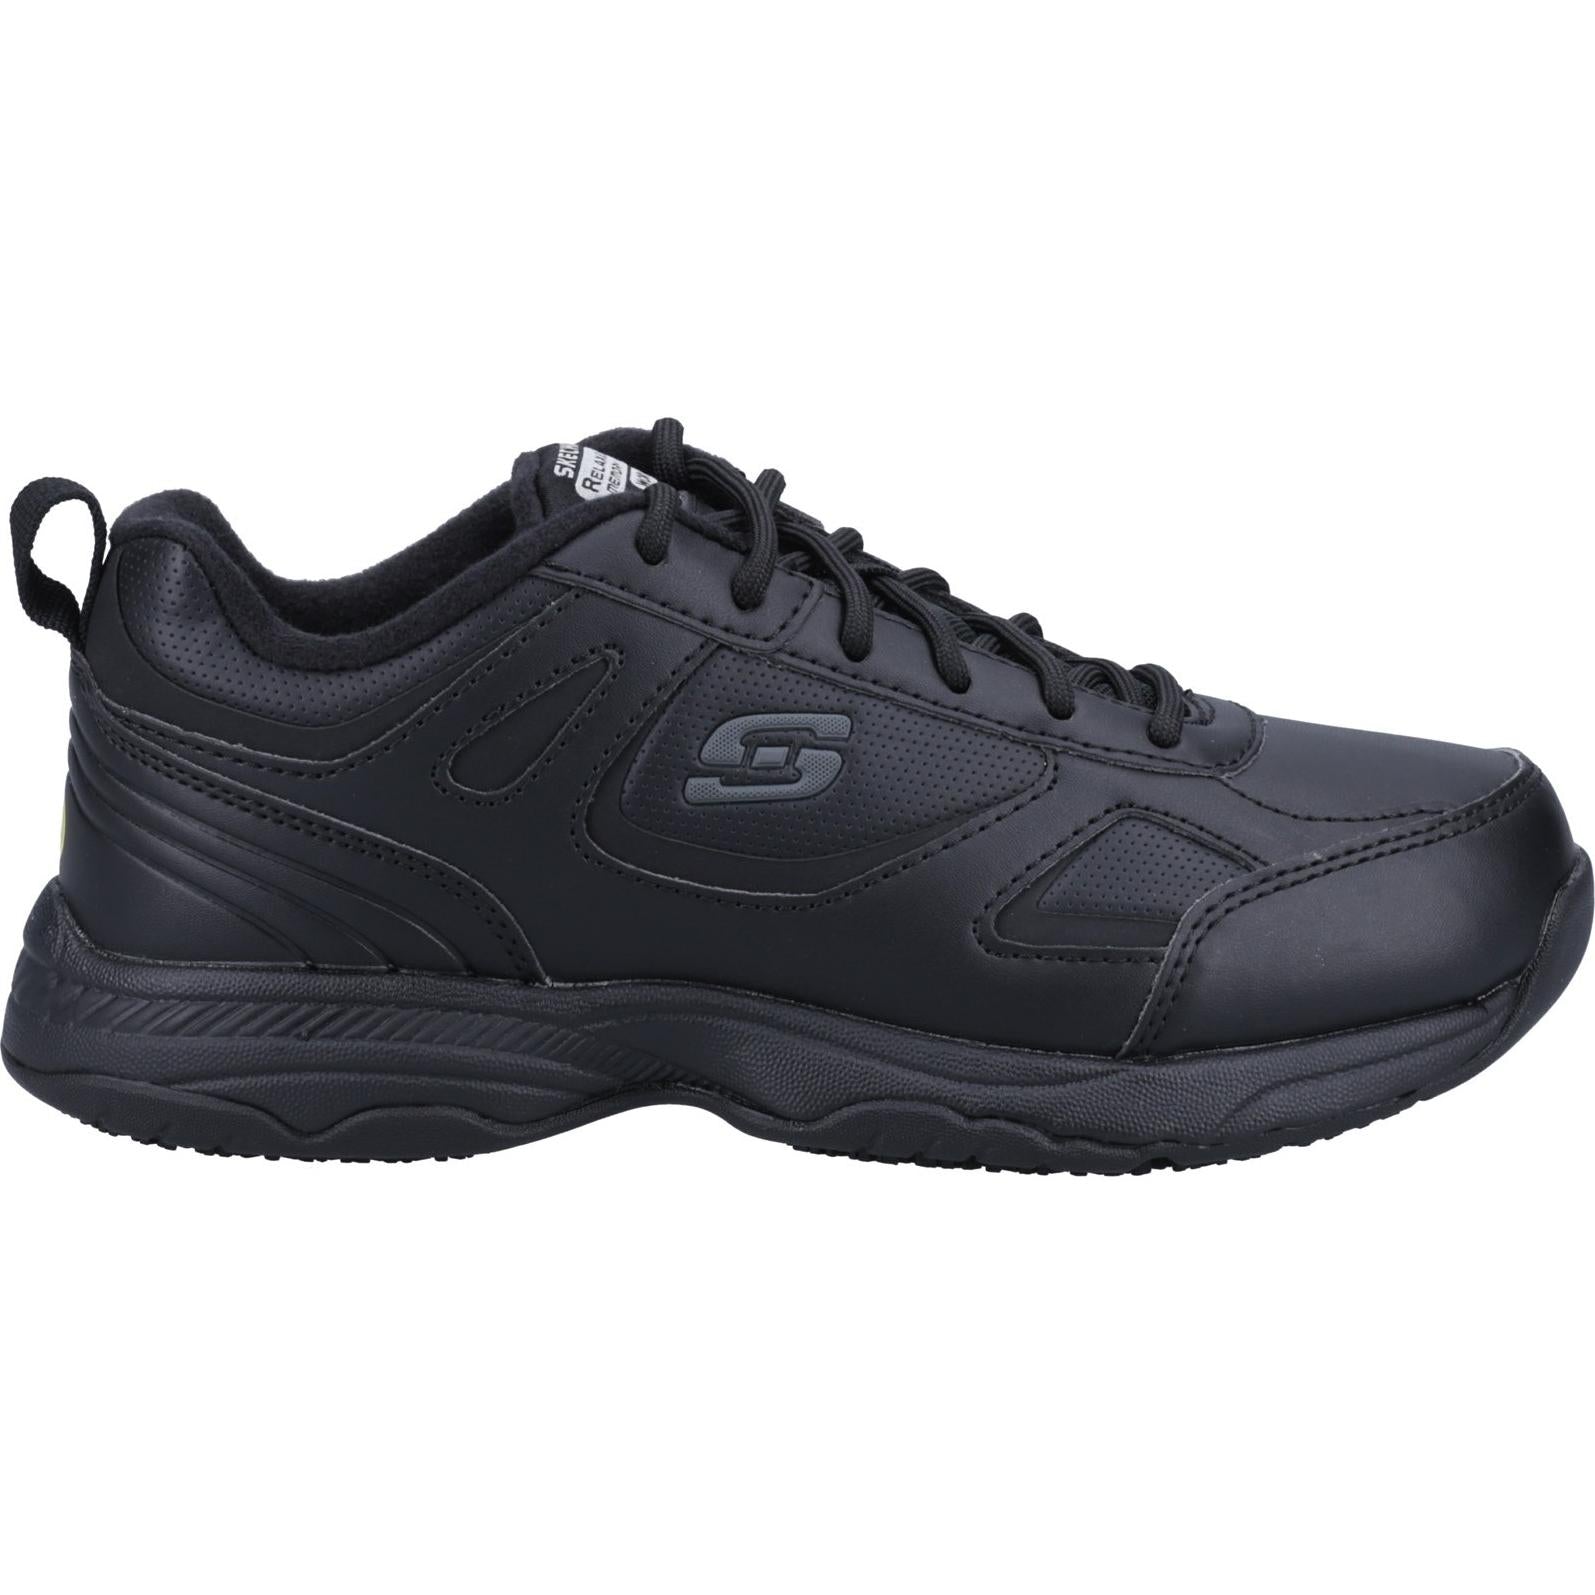 Skechers Work Relaxed Fit: Dighton - Bricelyn SR Safety Shoe